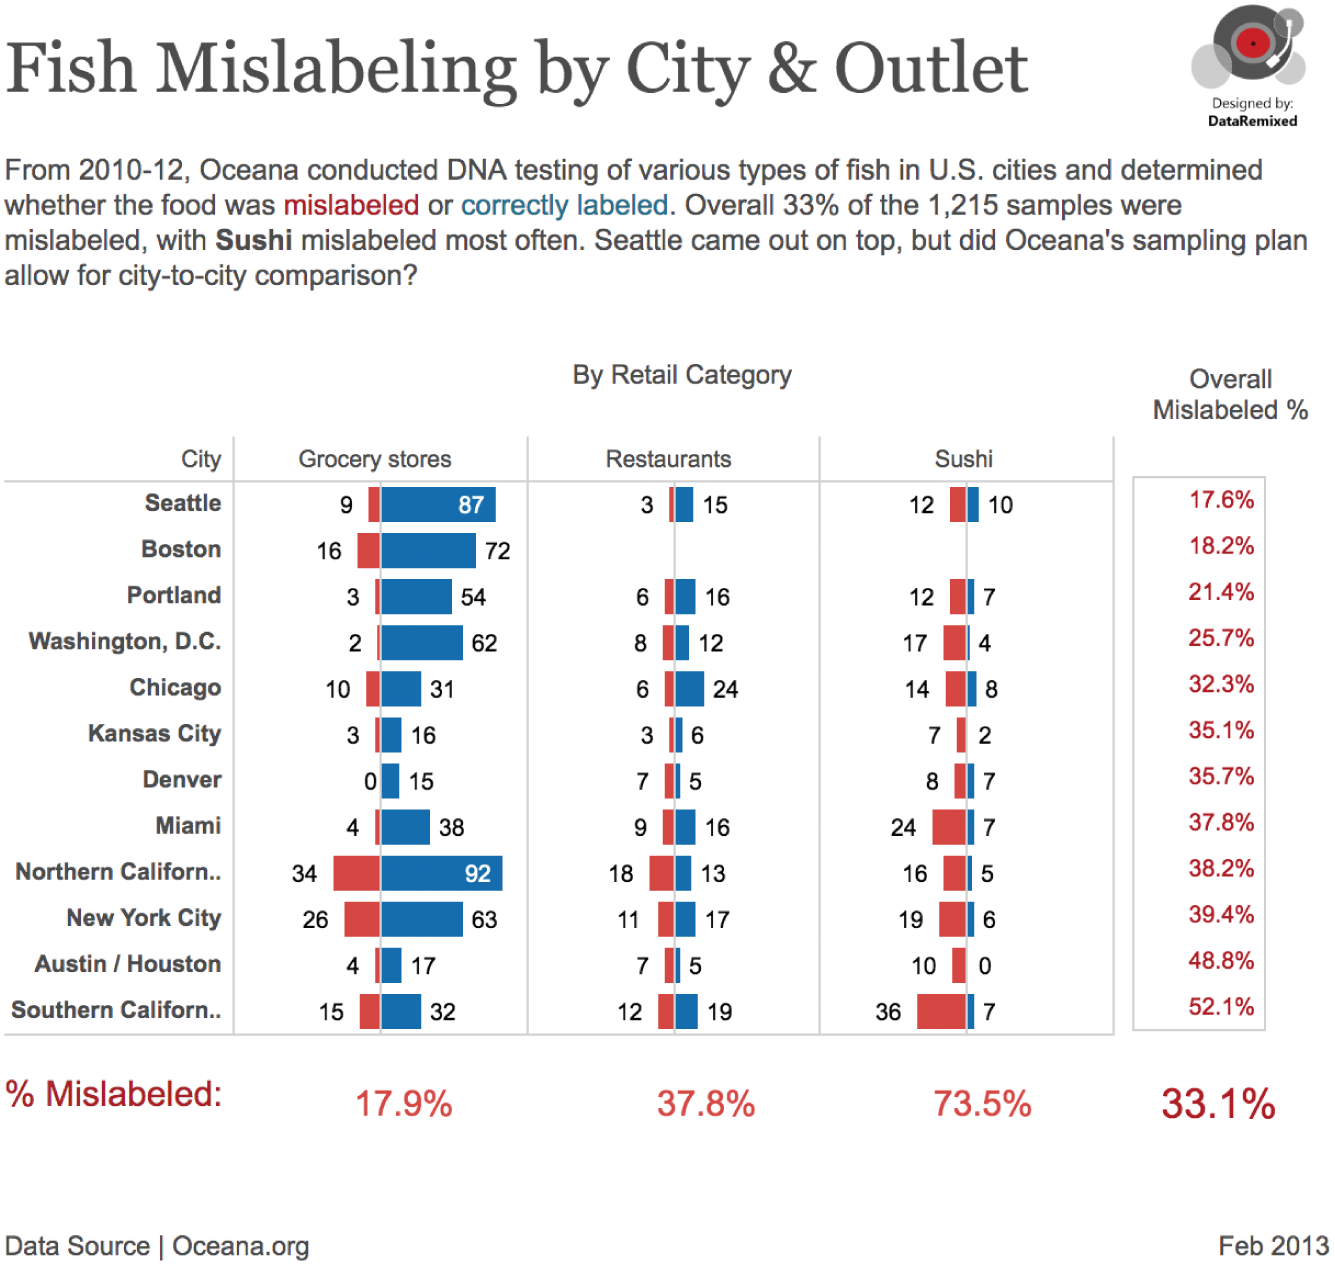 Tabular chart presenting the details of fish mislabeling by city and outlet, by retail category.